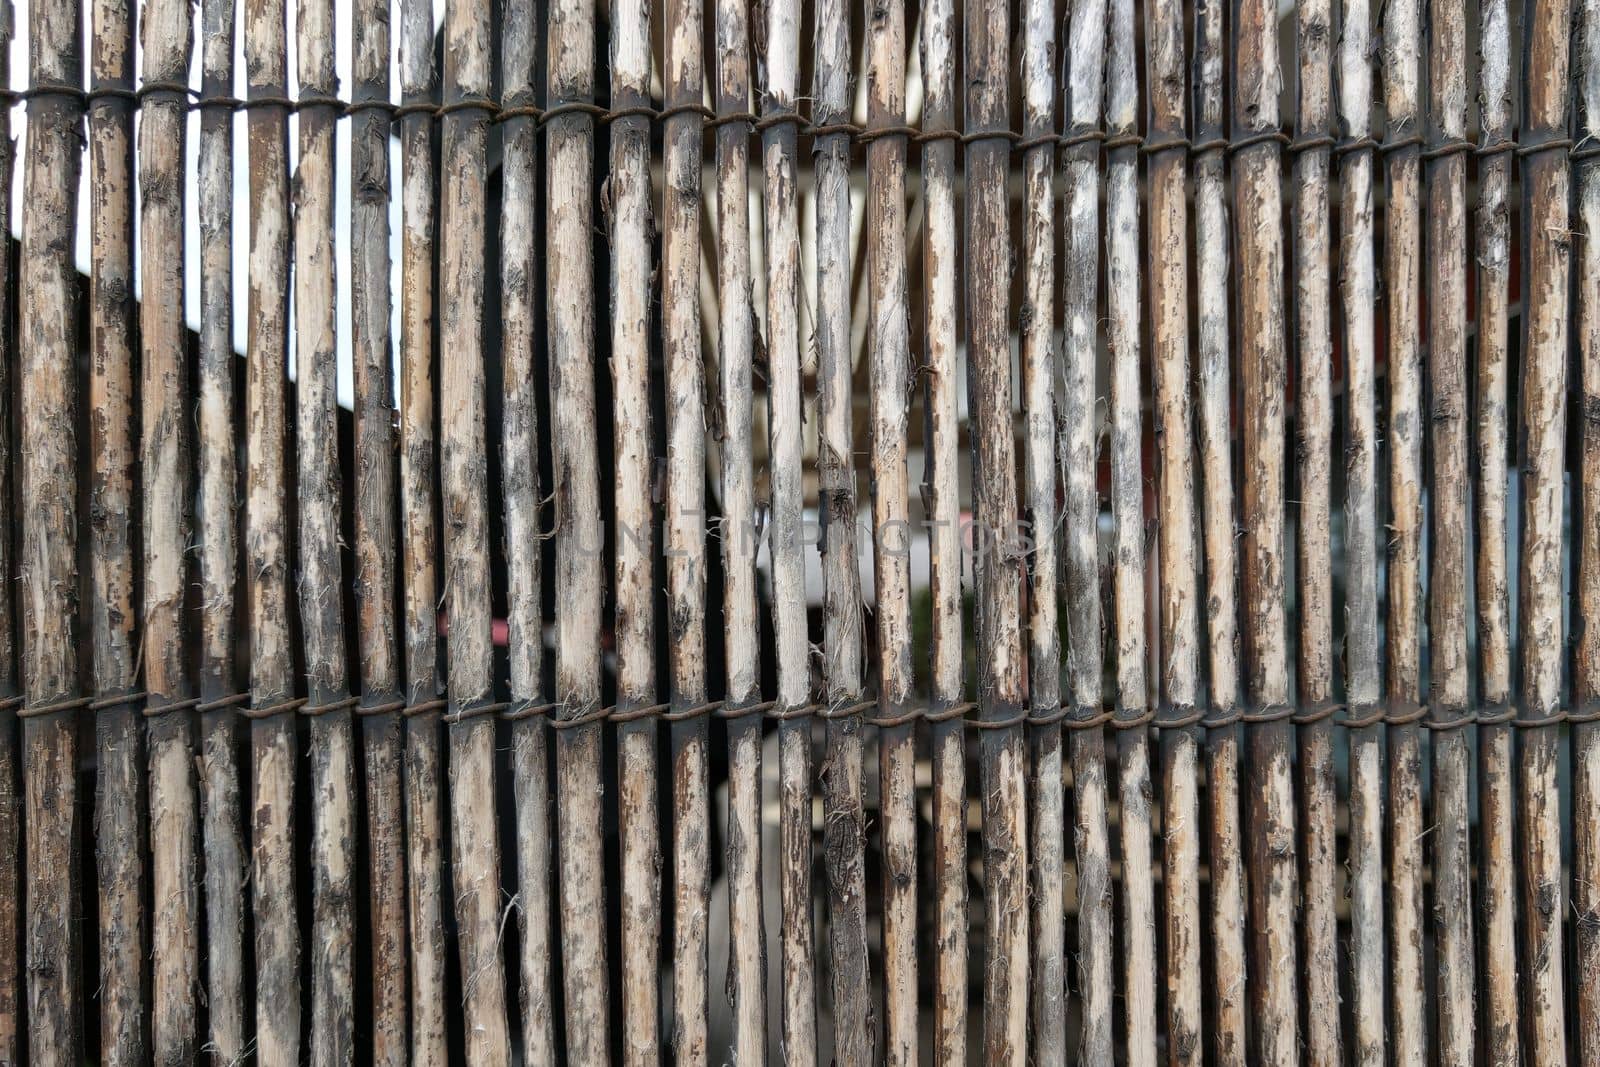 View of the old bamboo fence, background, texture